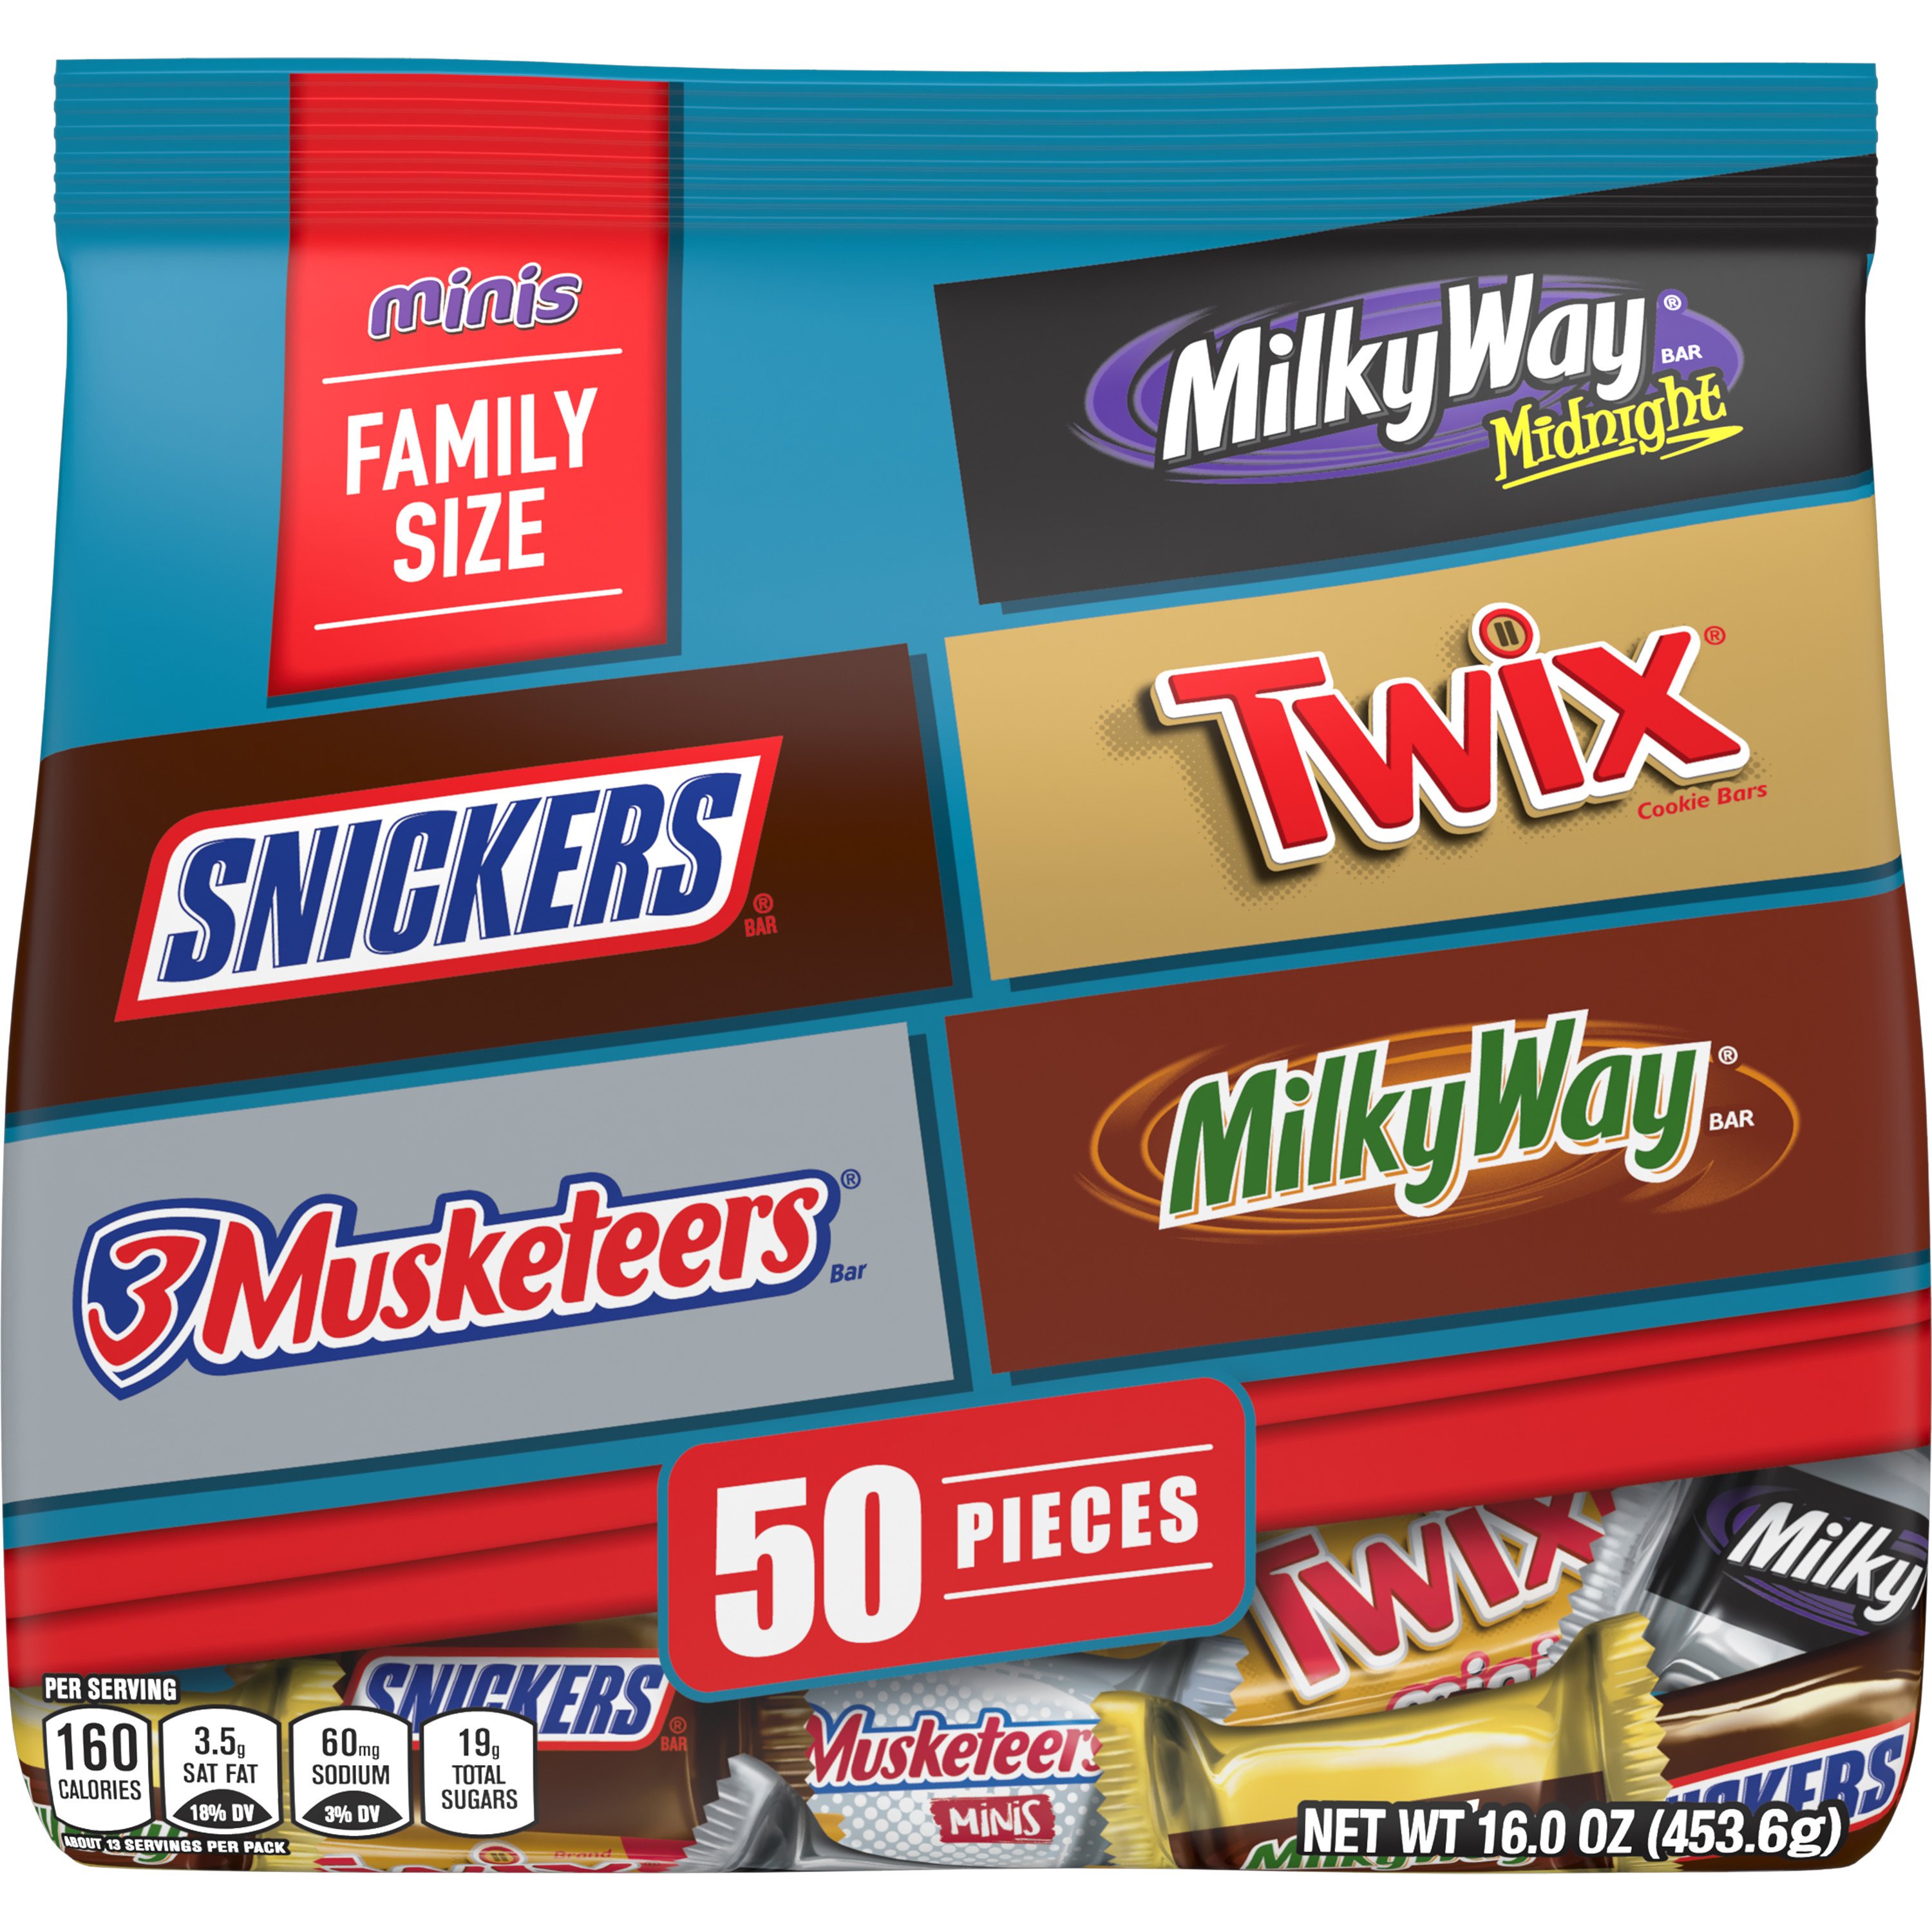 Snickers Fun Size Chocolate Candy Bars - Shop Candy at H-E-B